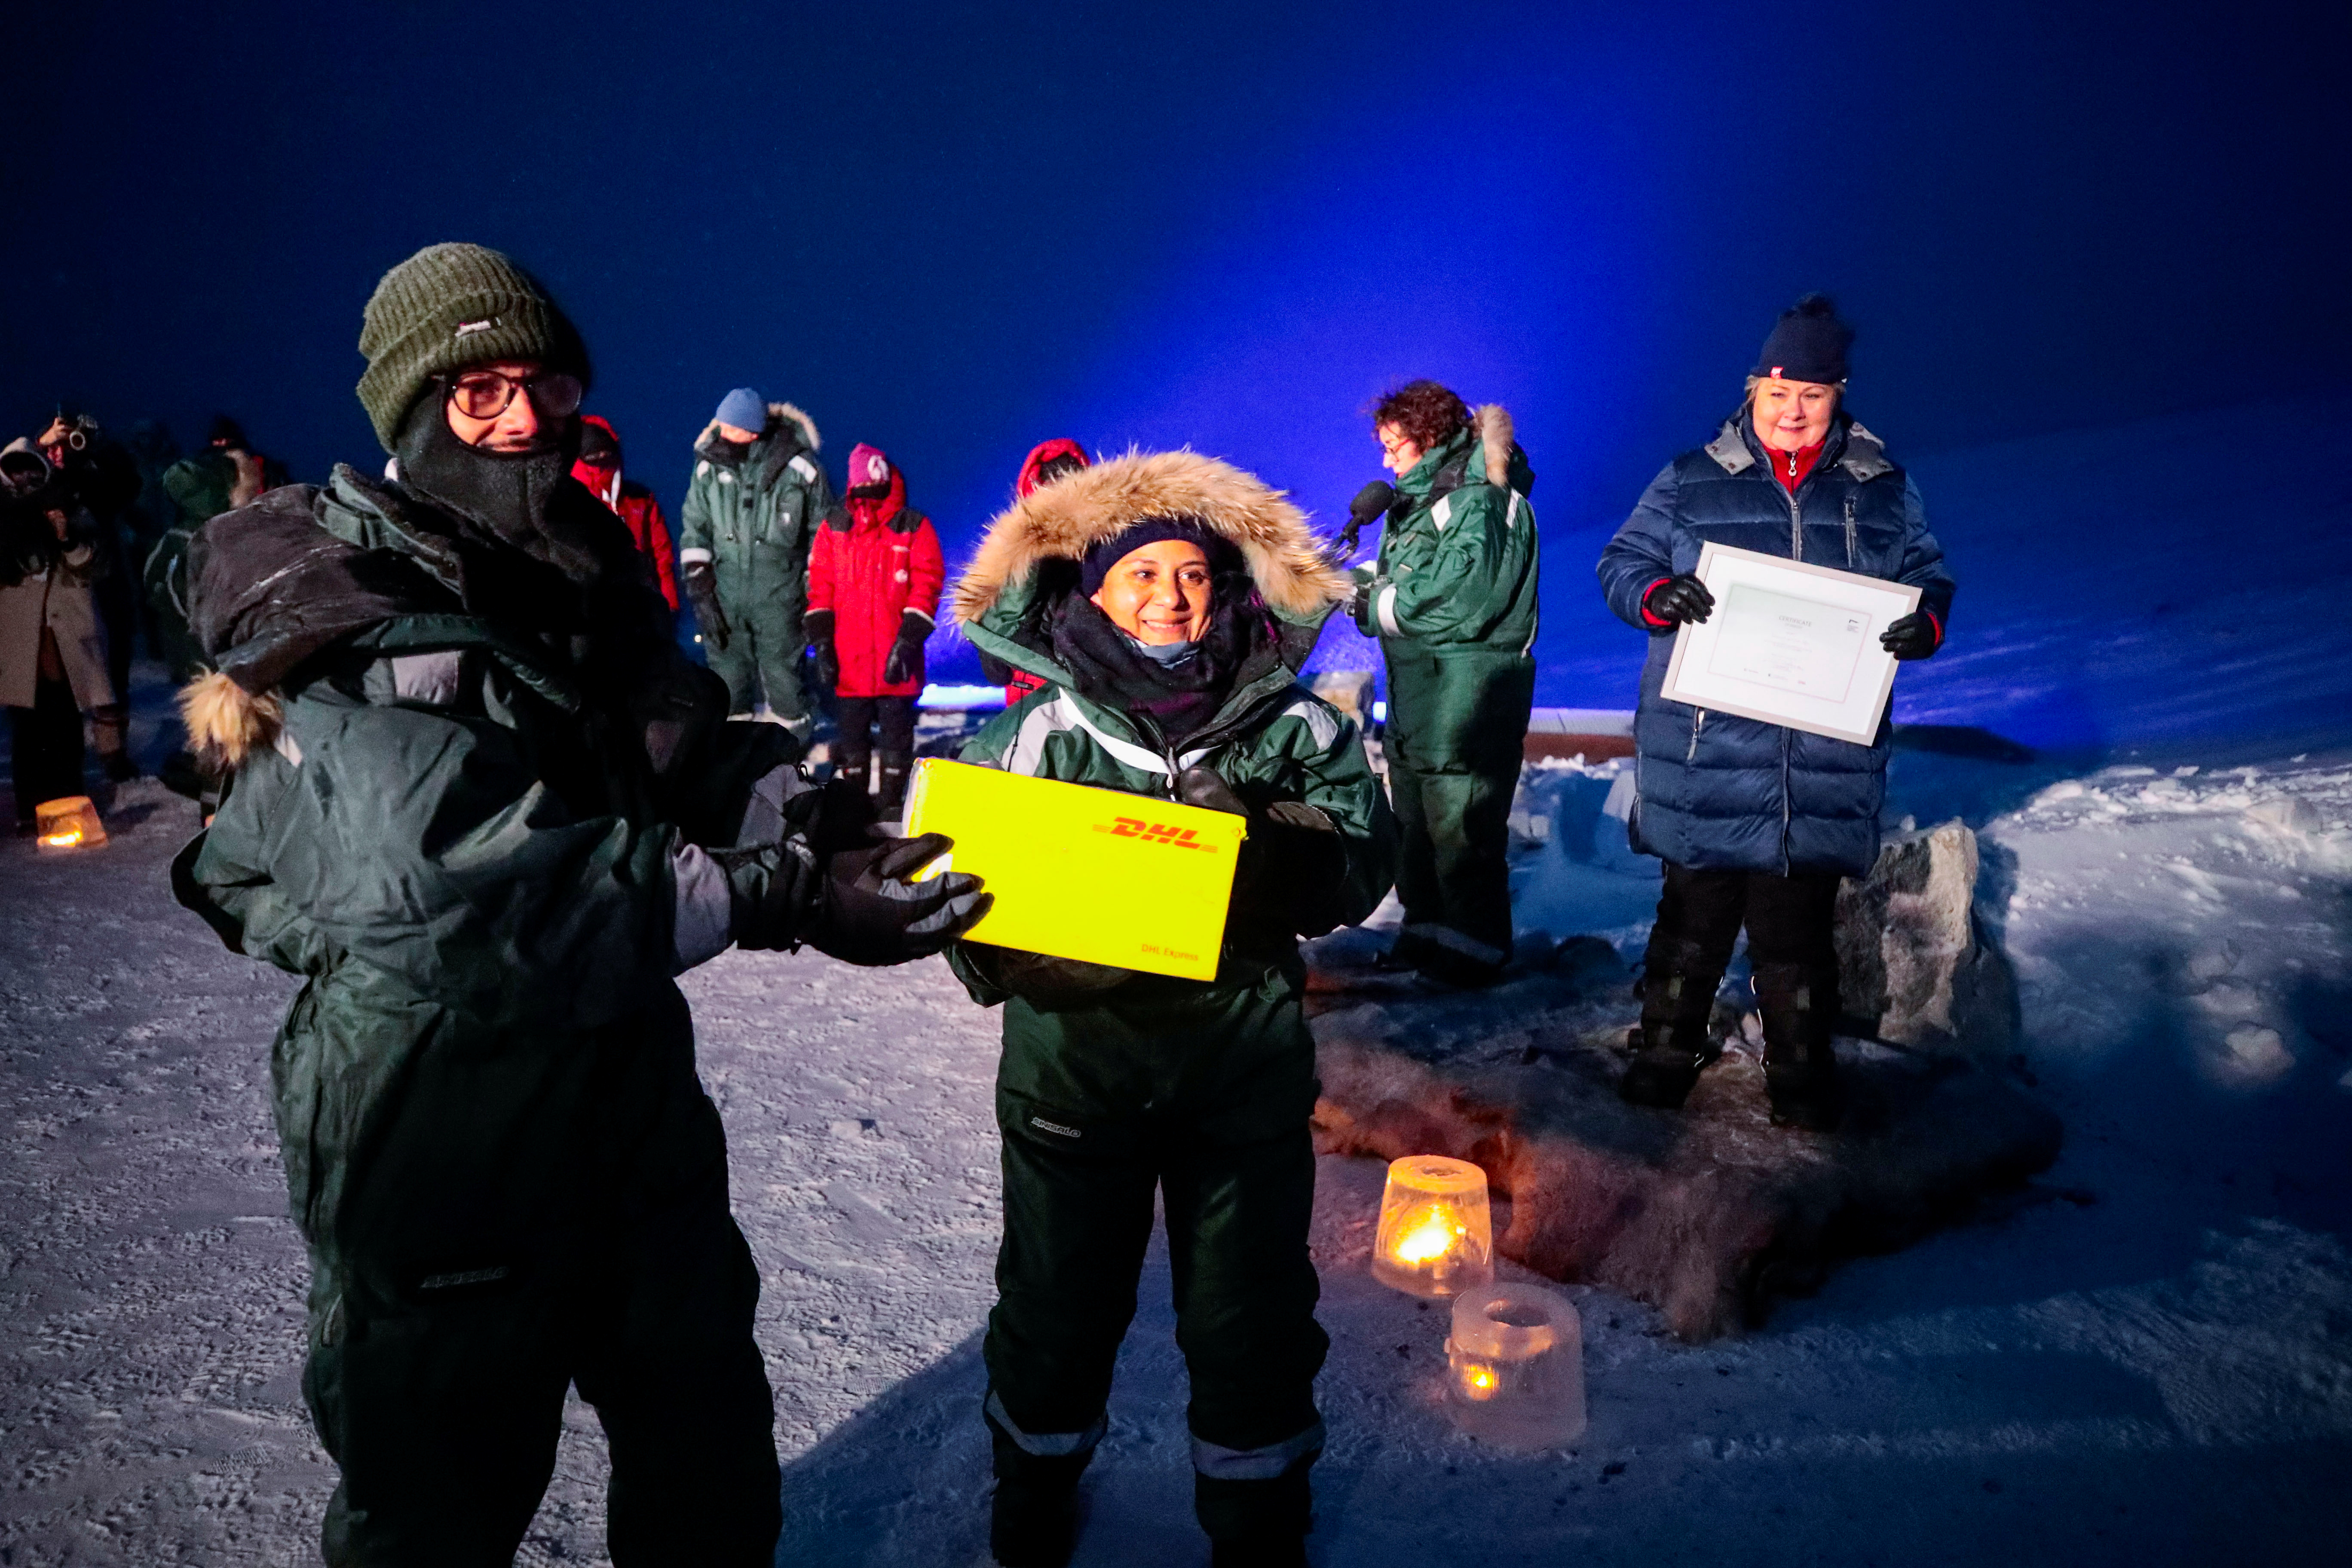 Representatives from many countries and universities arrive in the Svalbard's global seed vault with new seeds, in Longyearbyen